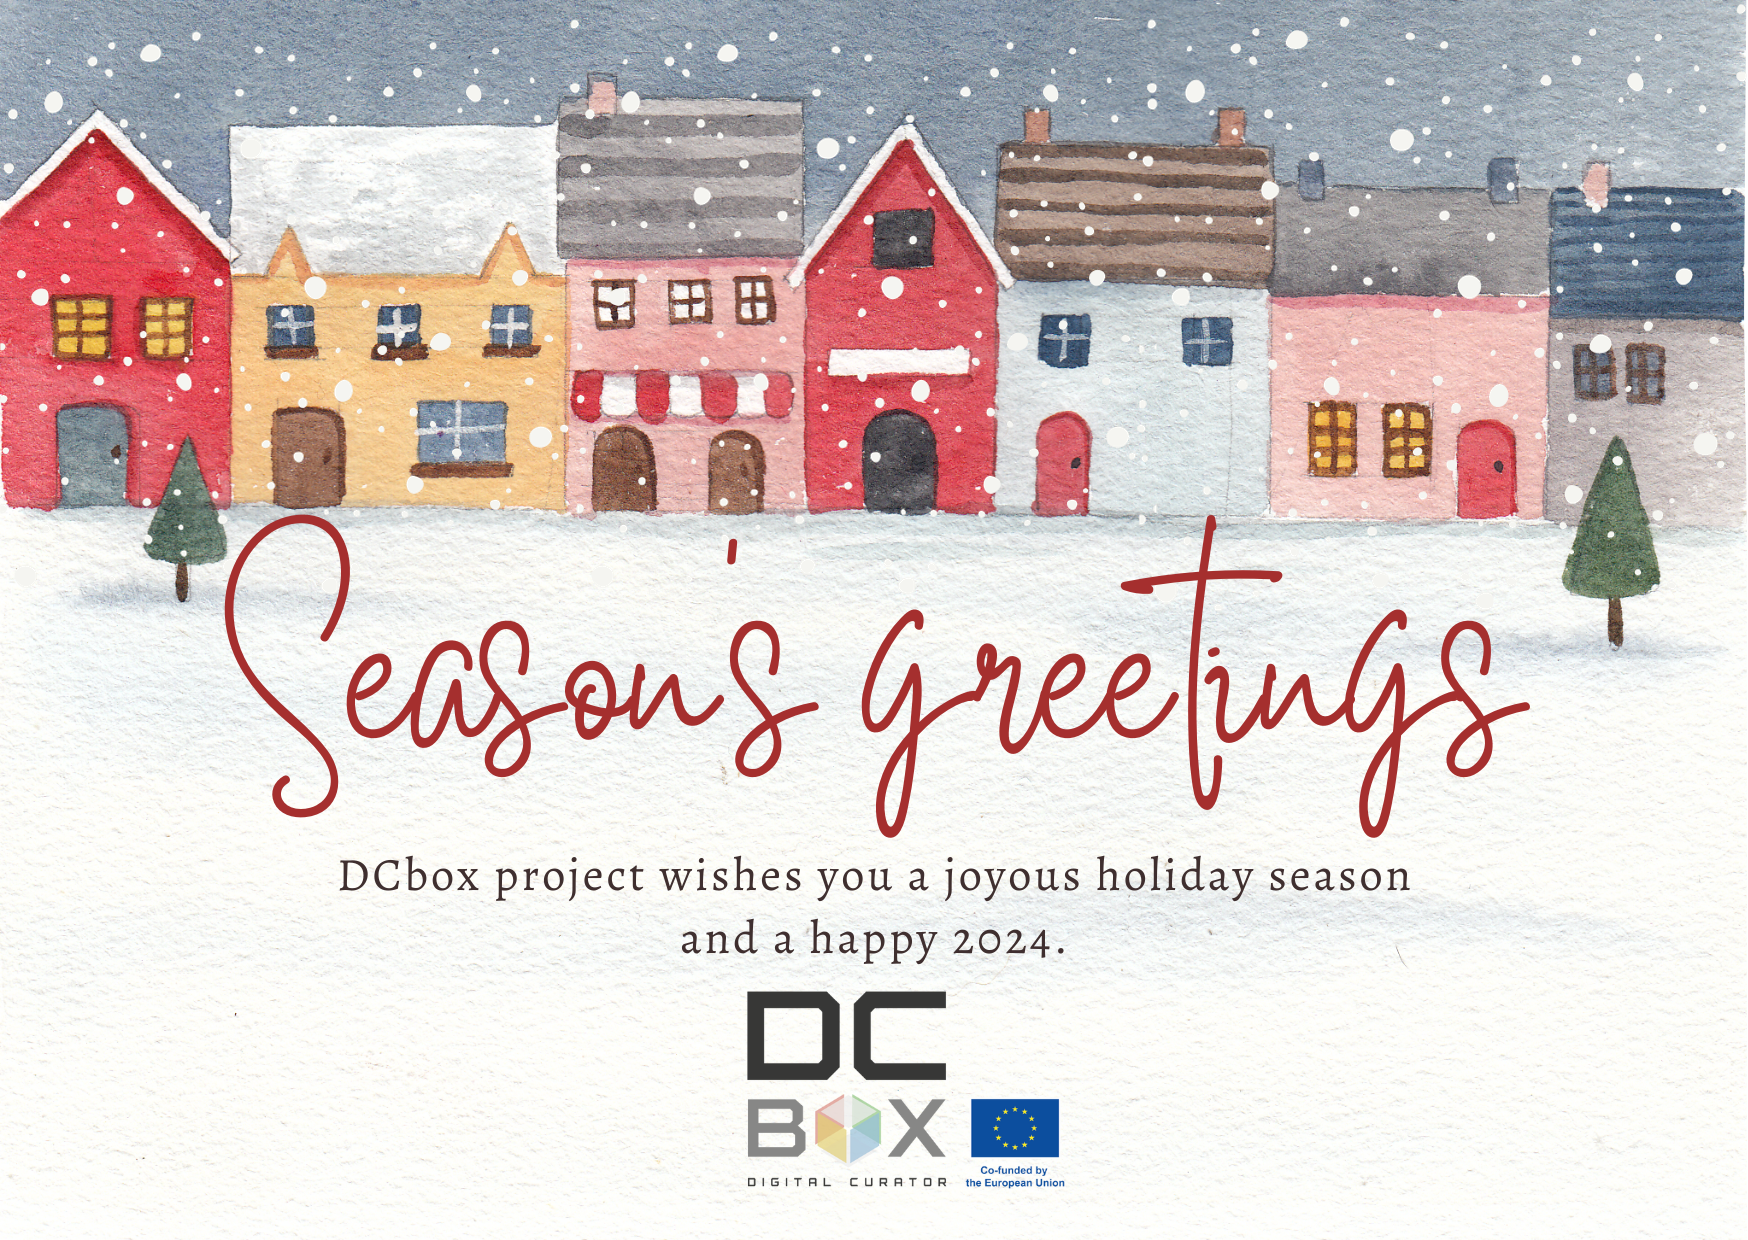 DCbox Holidays Wishes